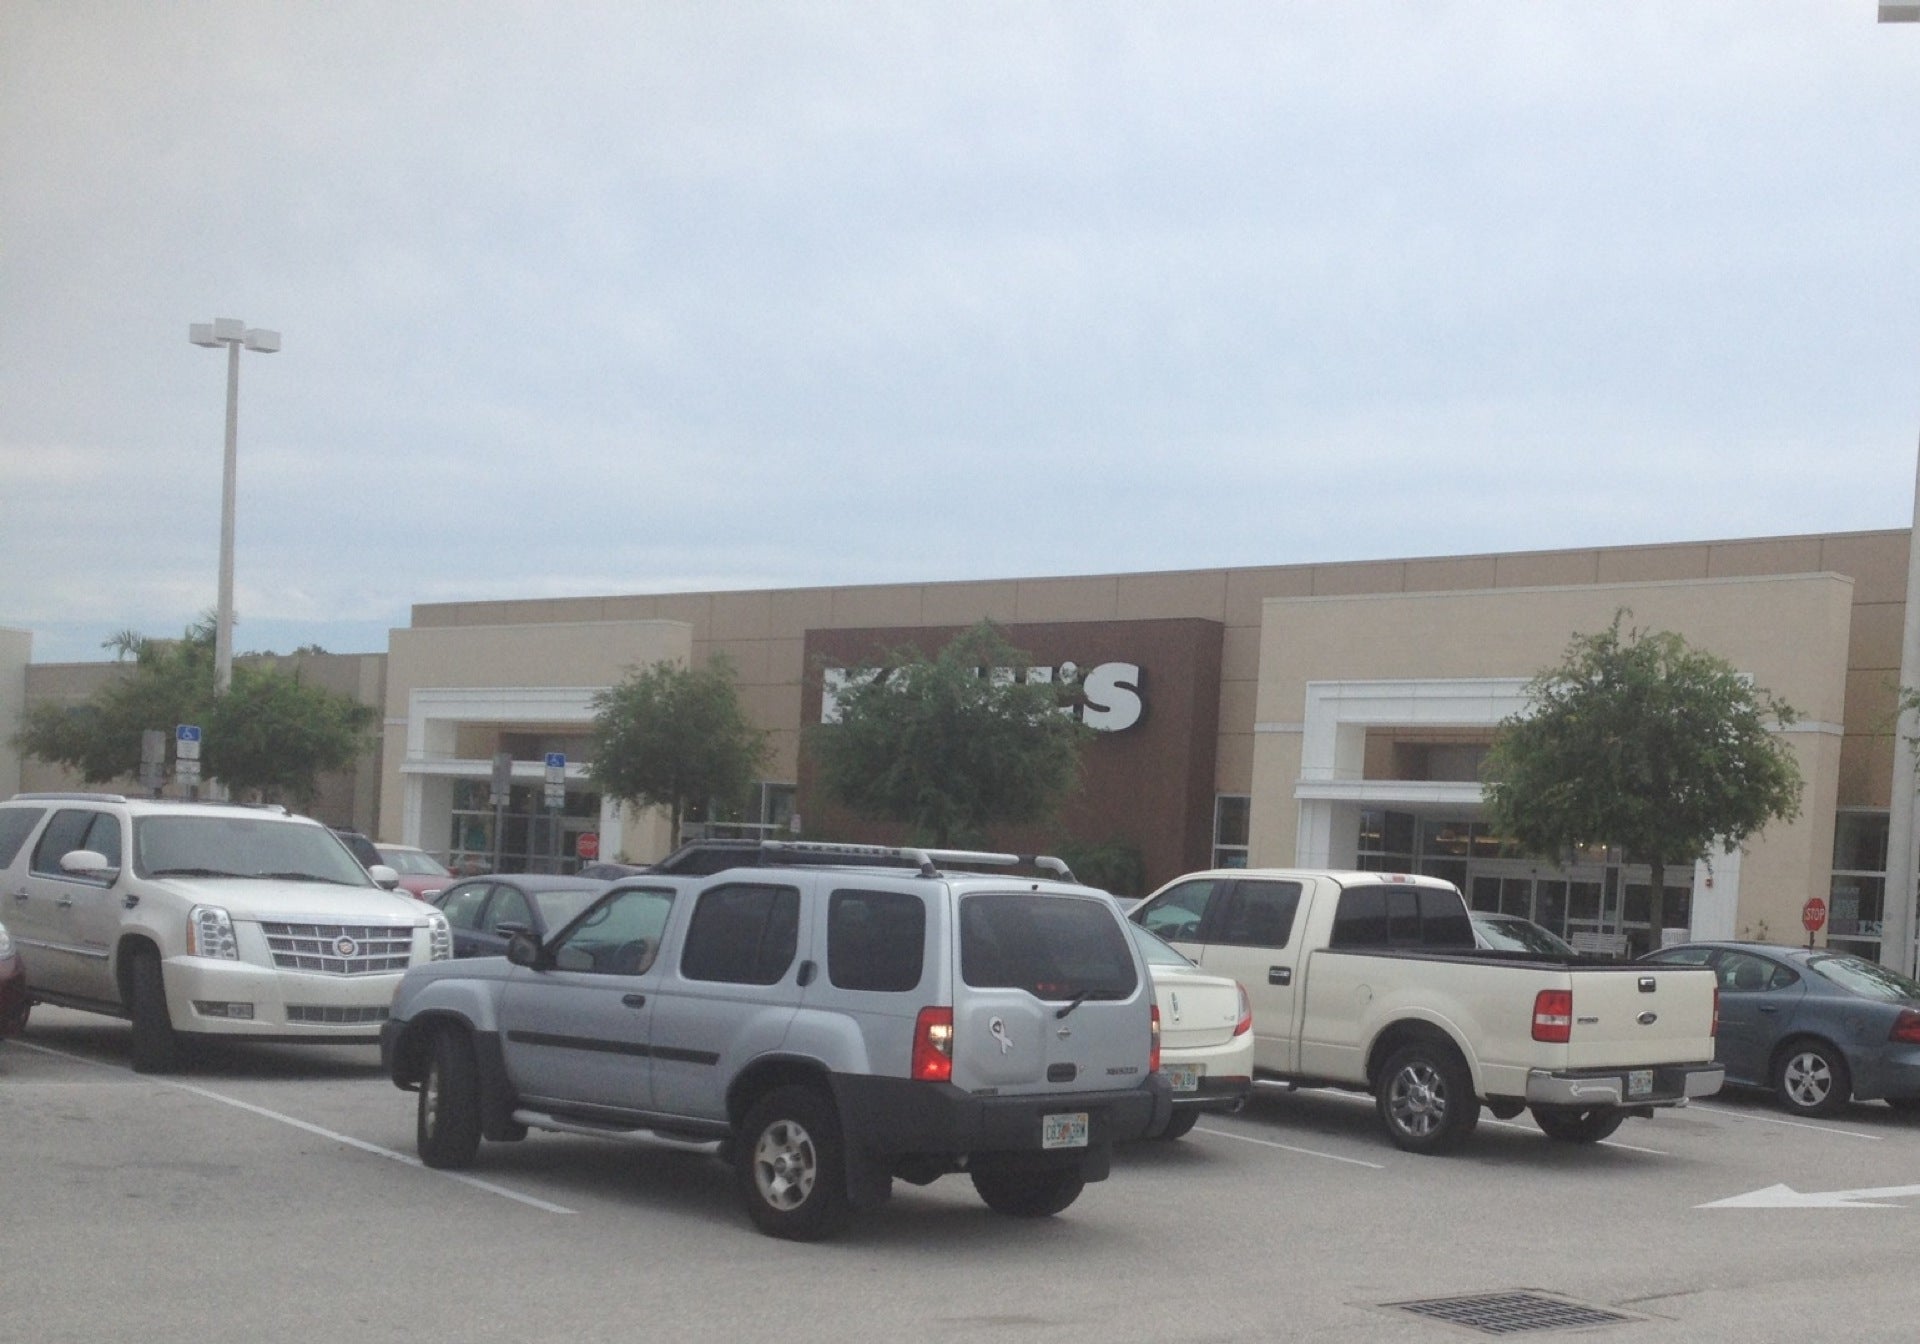 Kohl's, 7143 Narcoossee Rd, Orlando, FL, Clothing Retail - MapQuest